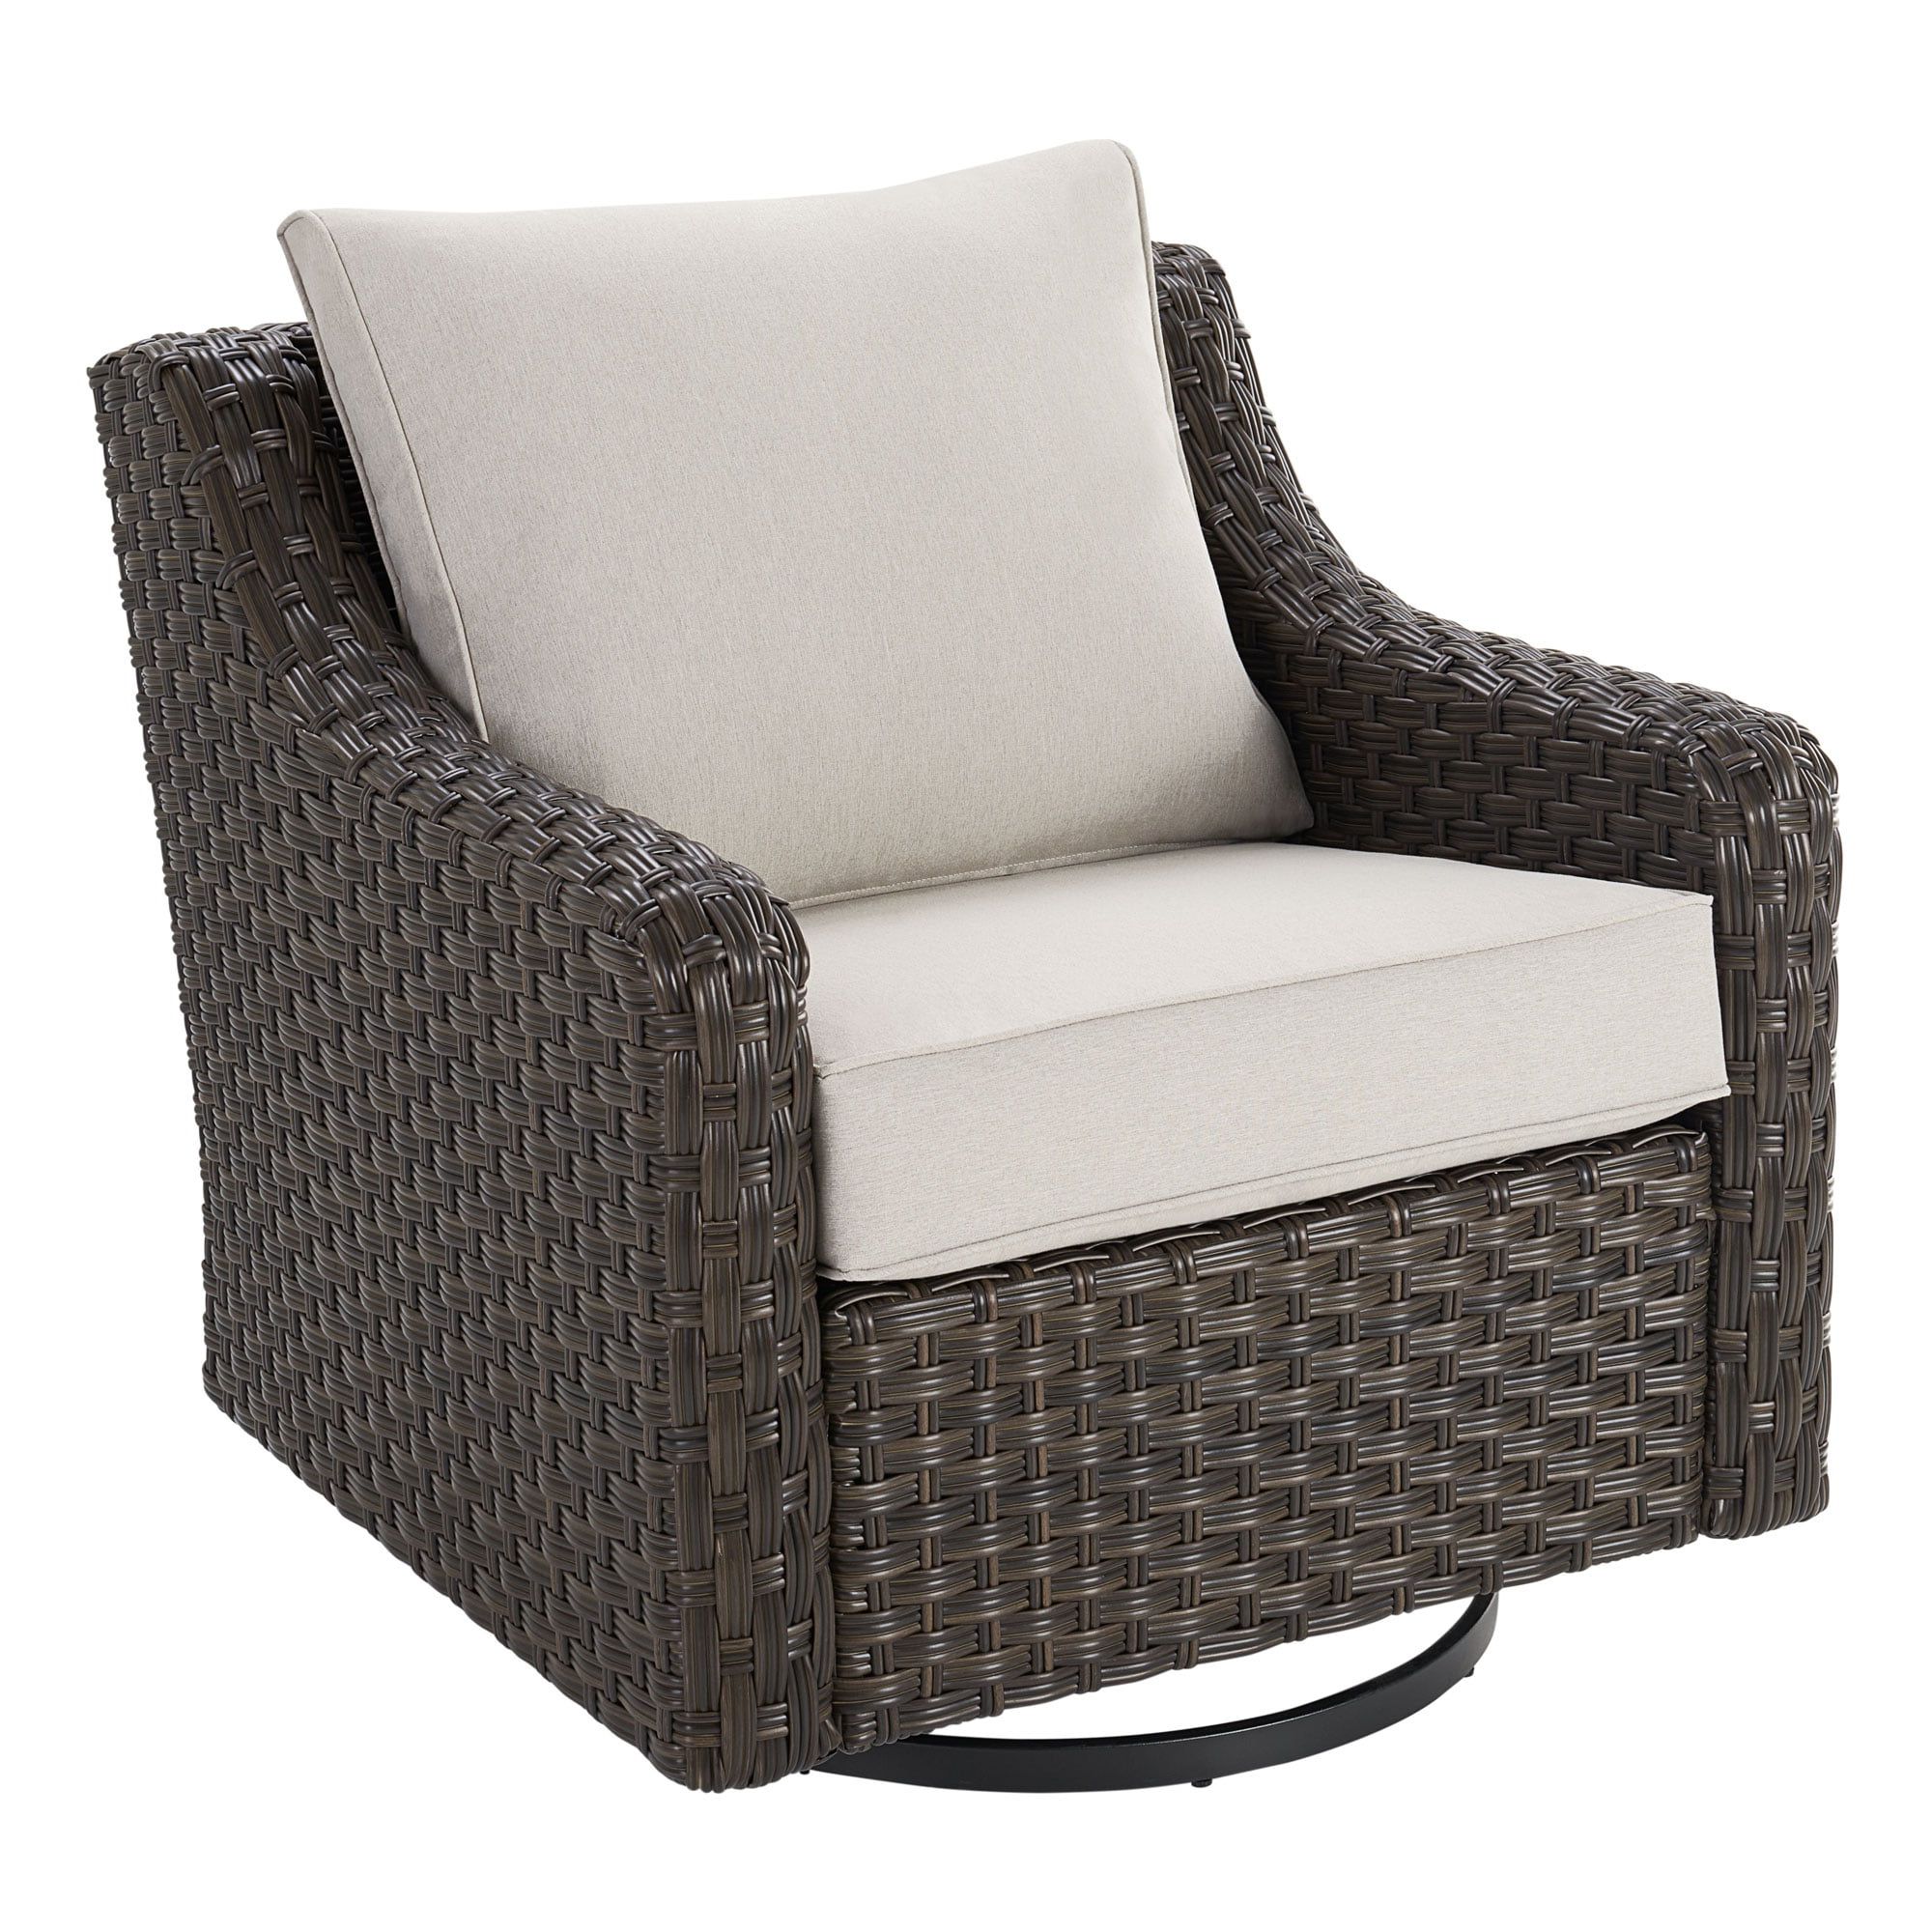 Better Homes & Gardens River Oaks 2 Piece Wicker Swivel Glider With Patio  Covers, Dark – Walmart With Newest 2 Piece Swivel Gliders With Patio Cover (View 10 of 15)